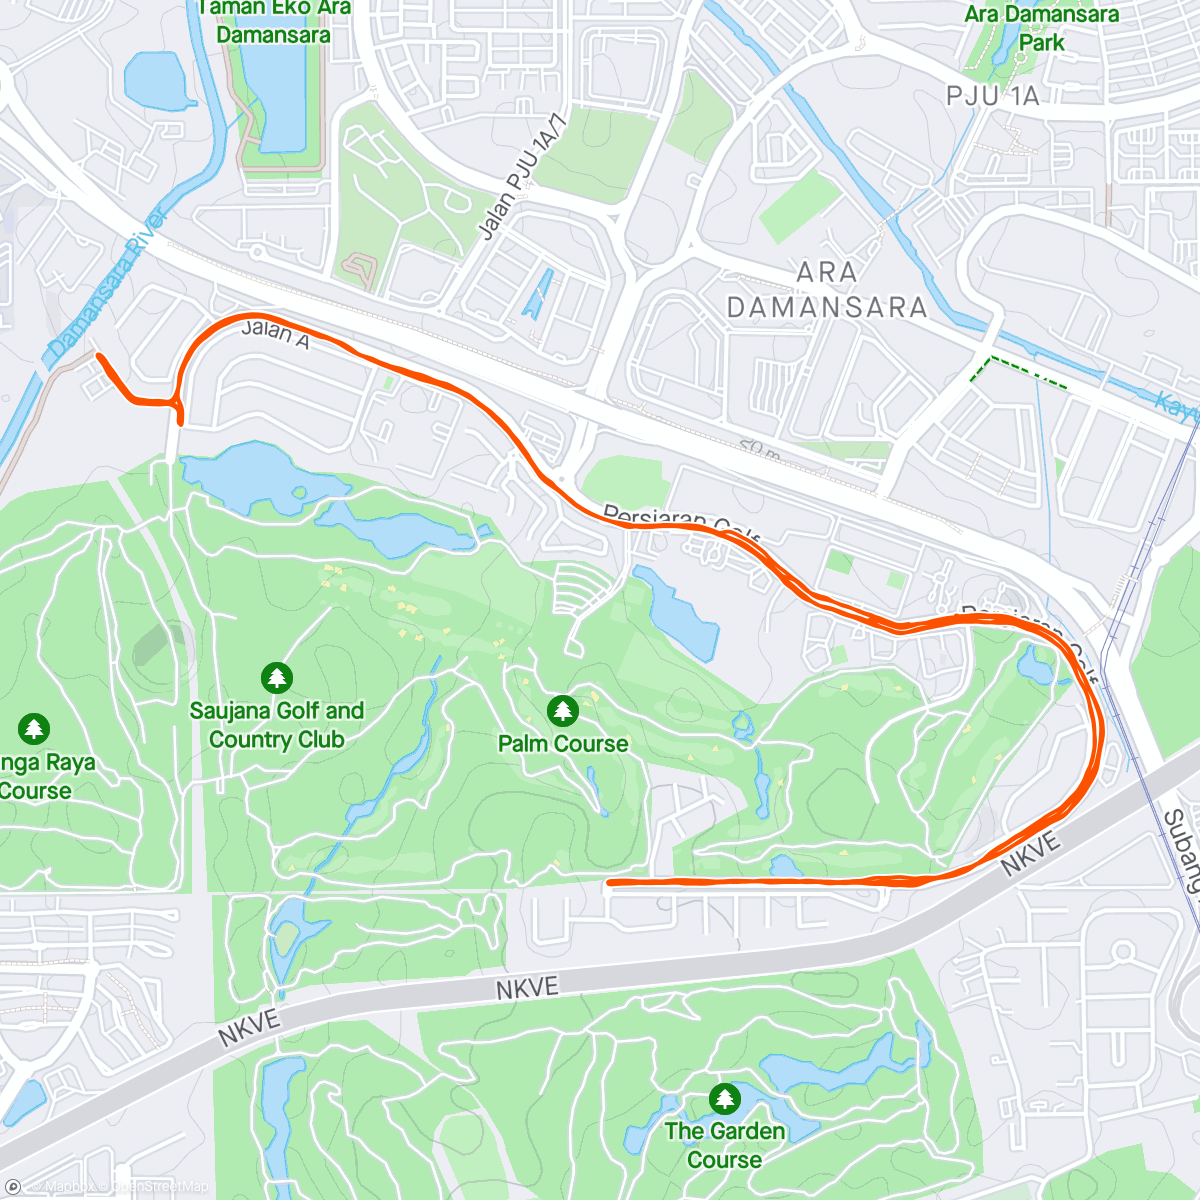 Карта физической активности (🌹🏃MWM by WR LSD + Brothers LSD Run 🐌🌹. Work till late, flu & cough 😷, not fit... Brothers LSD Run, sudden last minute change...last try Recovery Run follow Pacer 7 Min Group. TQ 🫰)